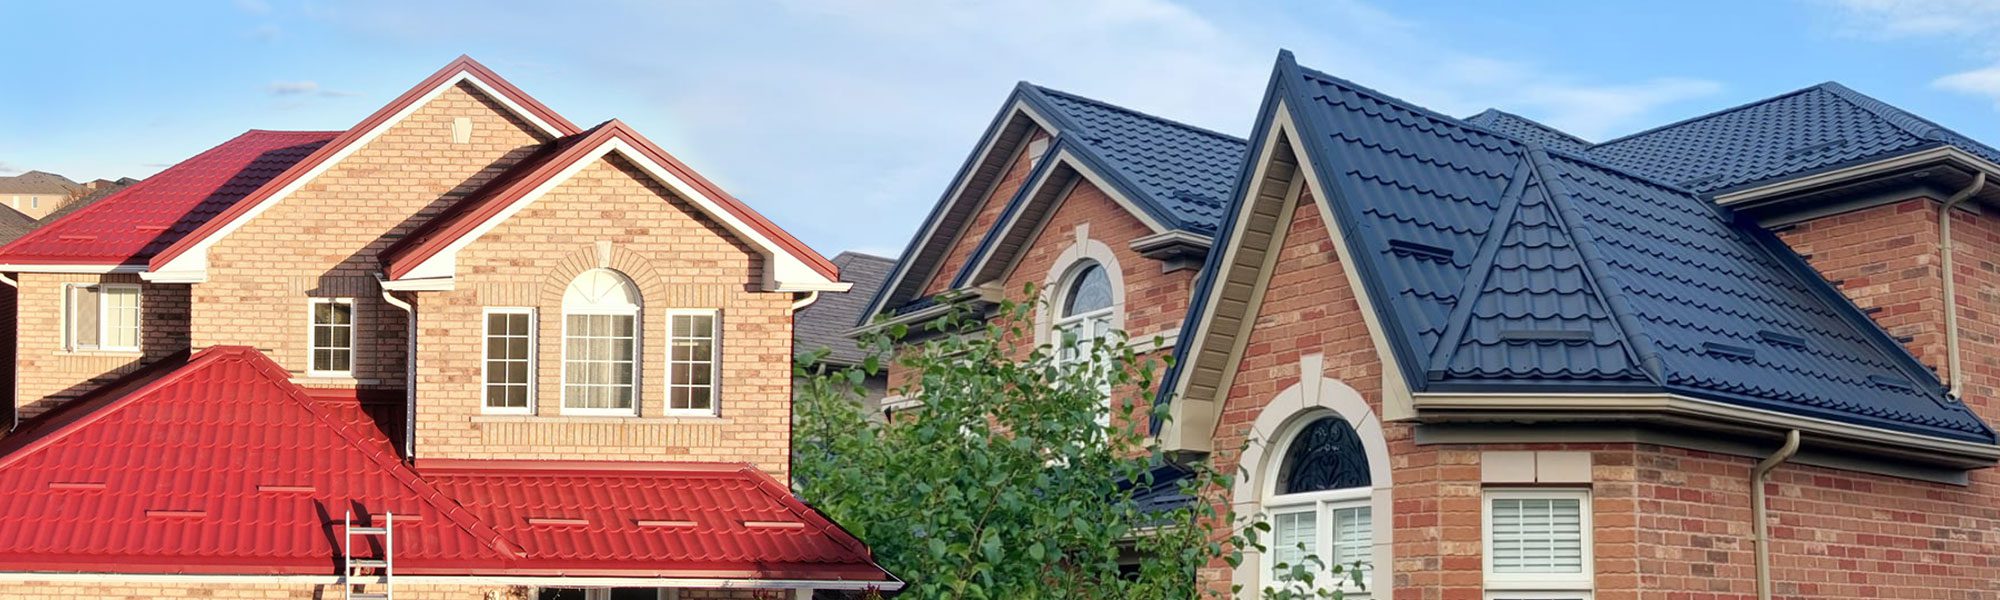 Metal roofing Installations in Ontario